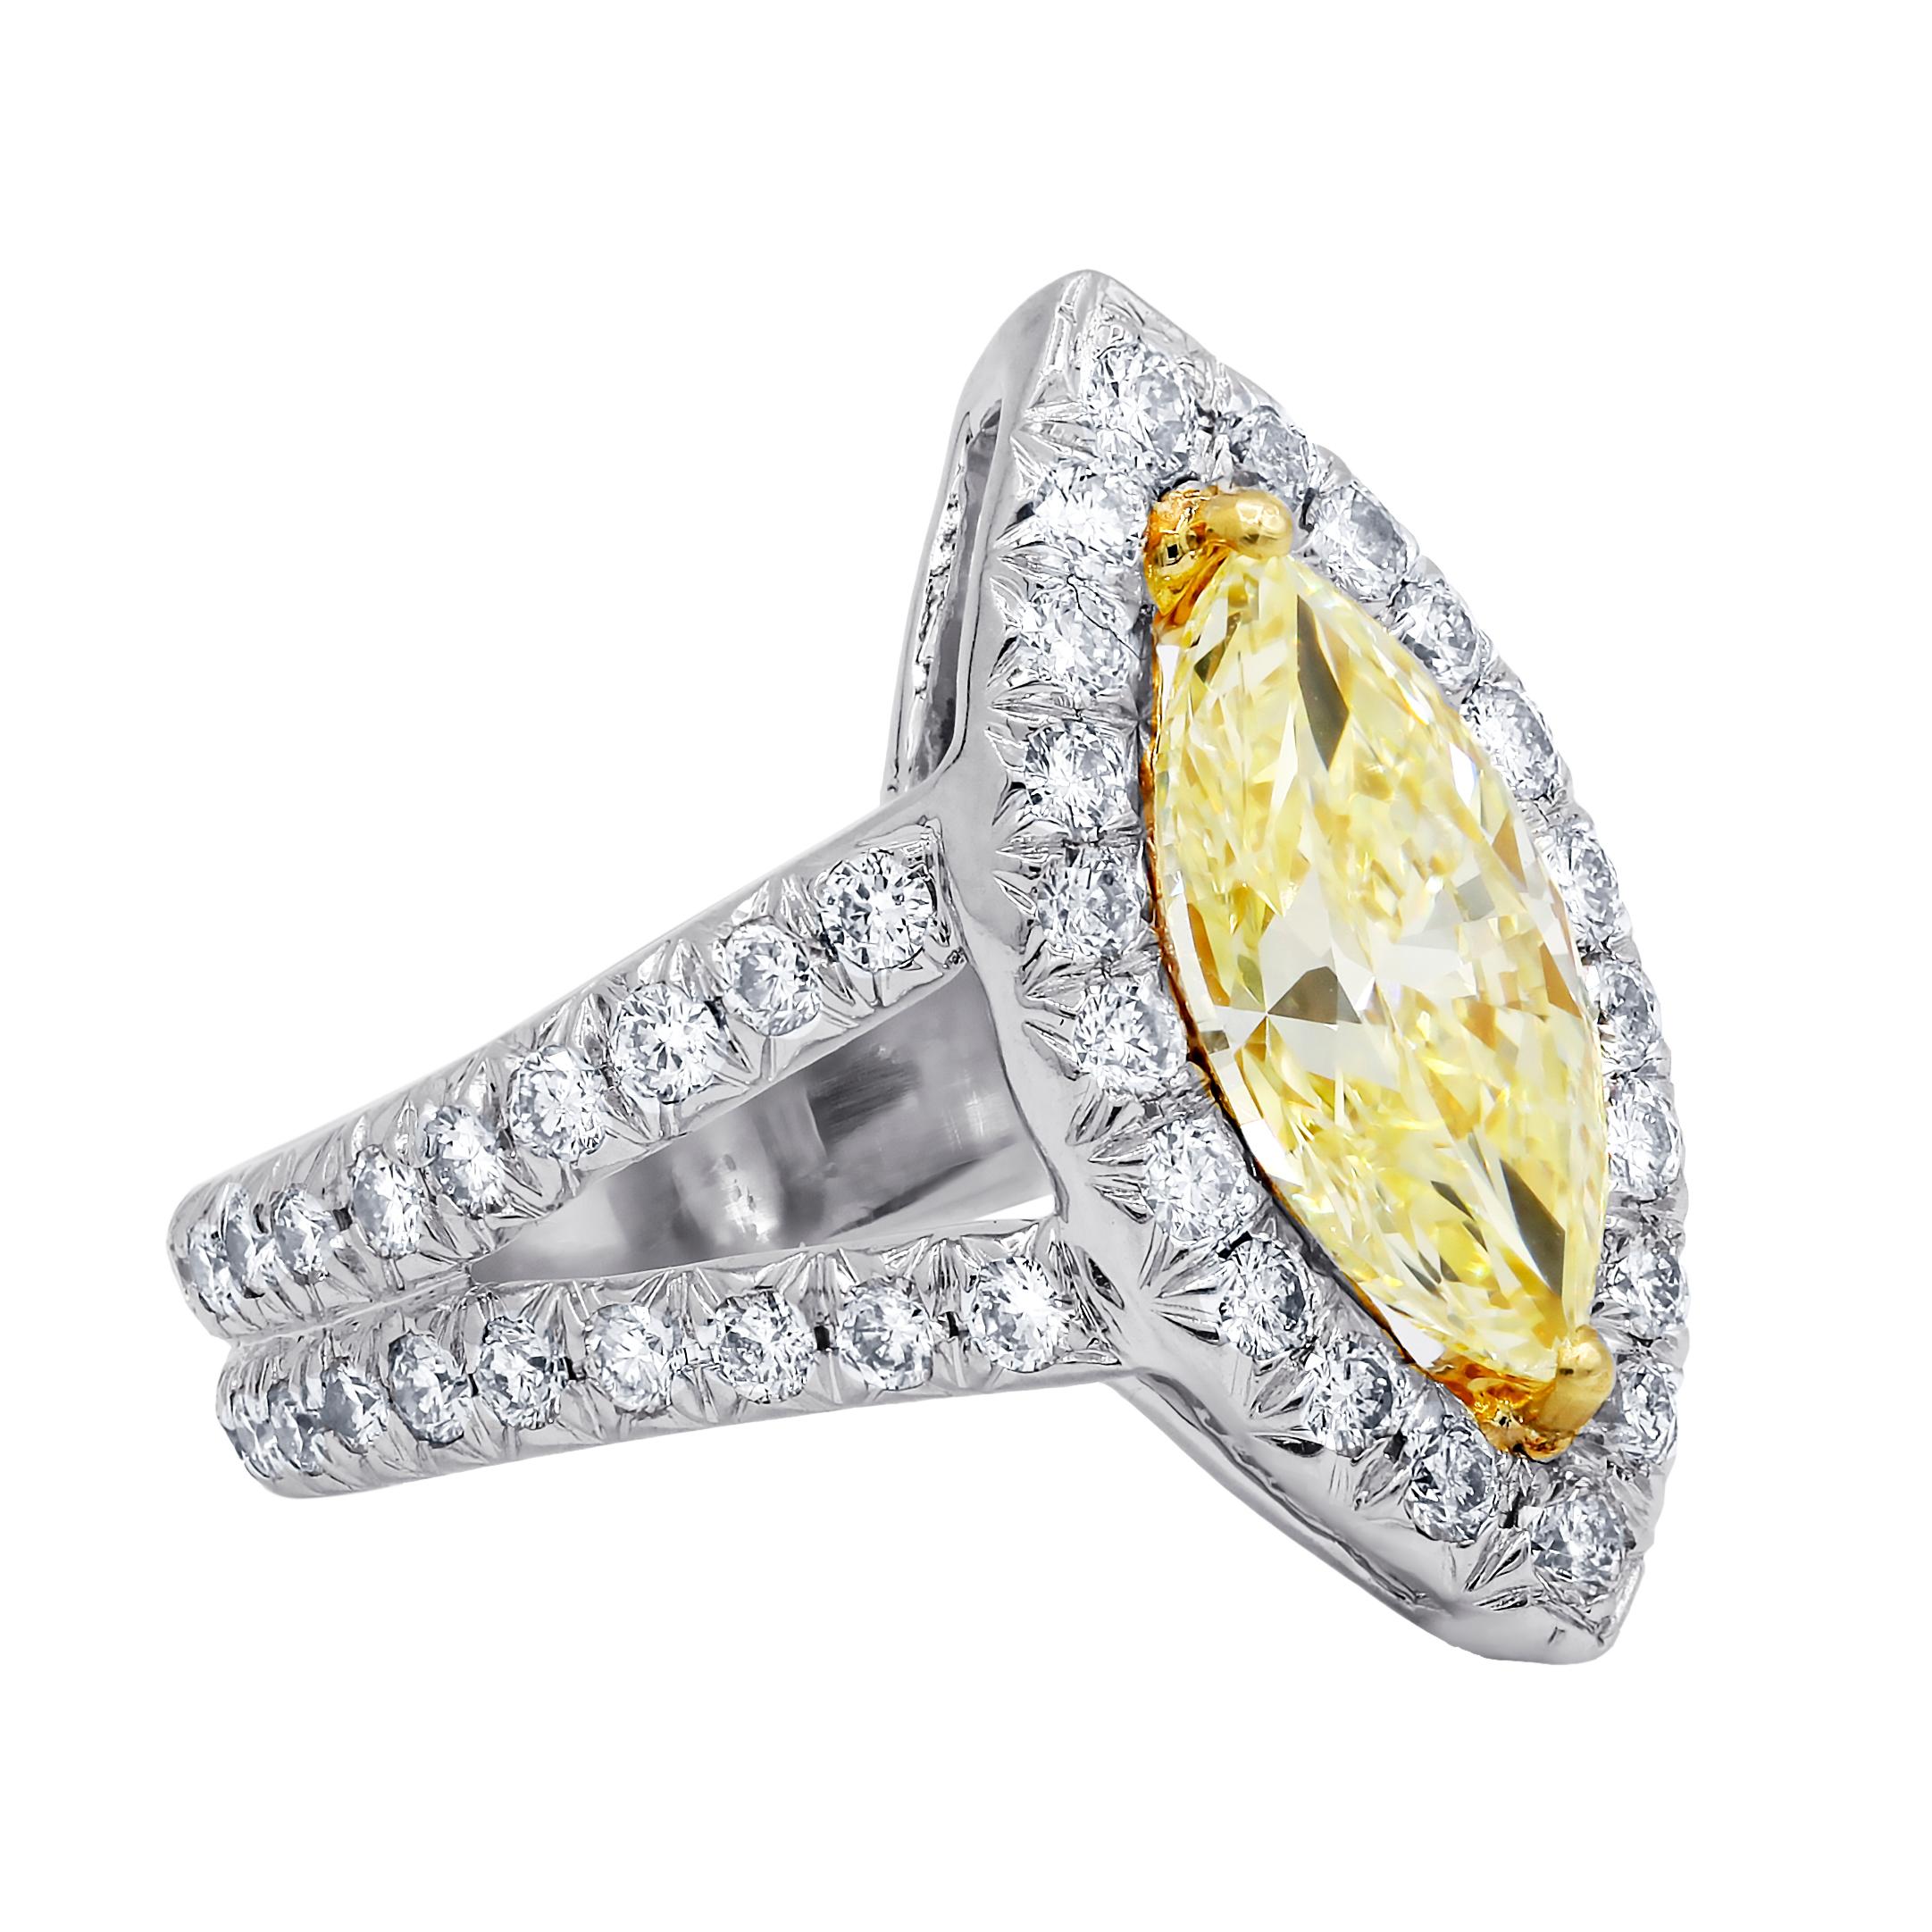 Platinum and 18kt diamond engagement ring with 2.51cts fancy yellow vs2 (mqc175)
set in a split shank with diamonds set all the way around and in halo 